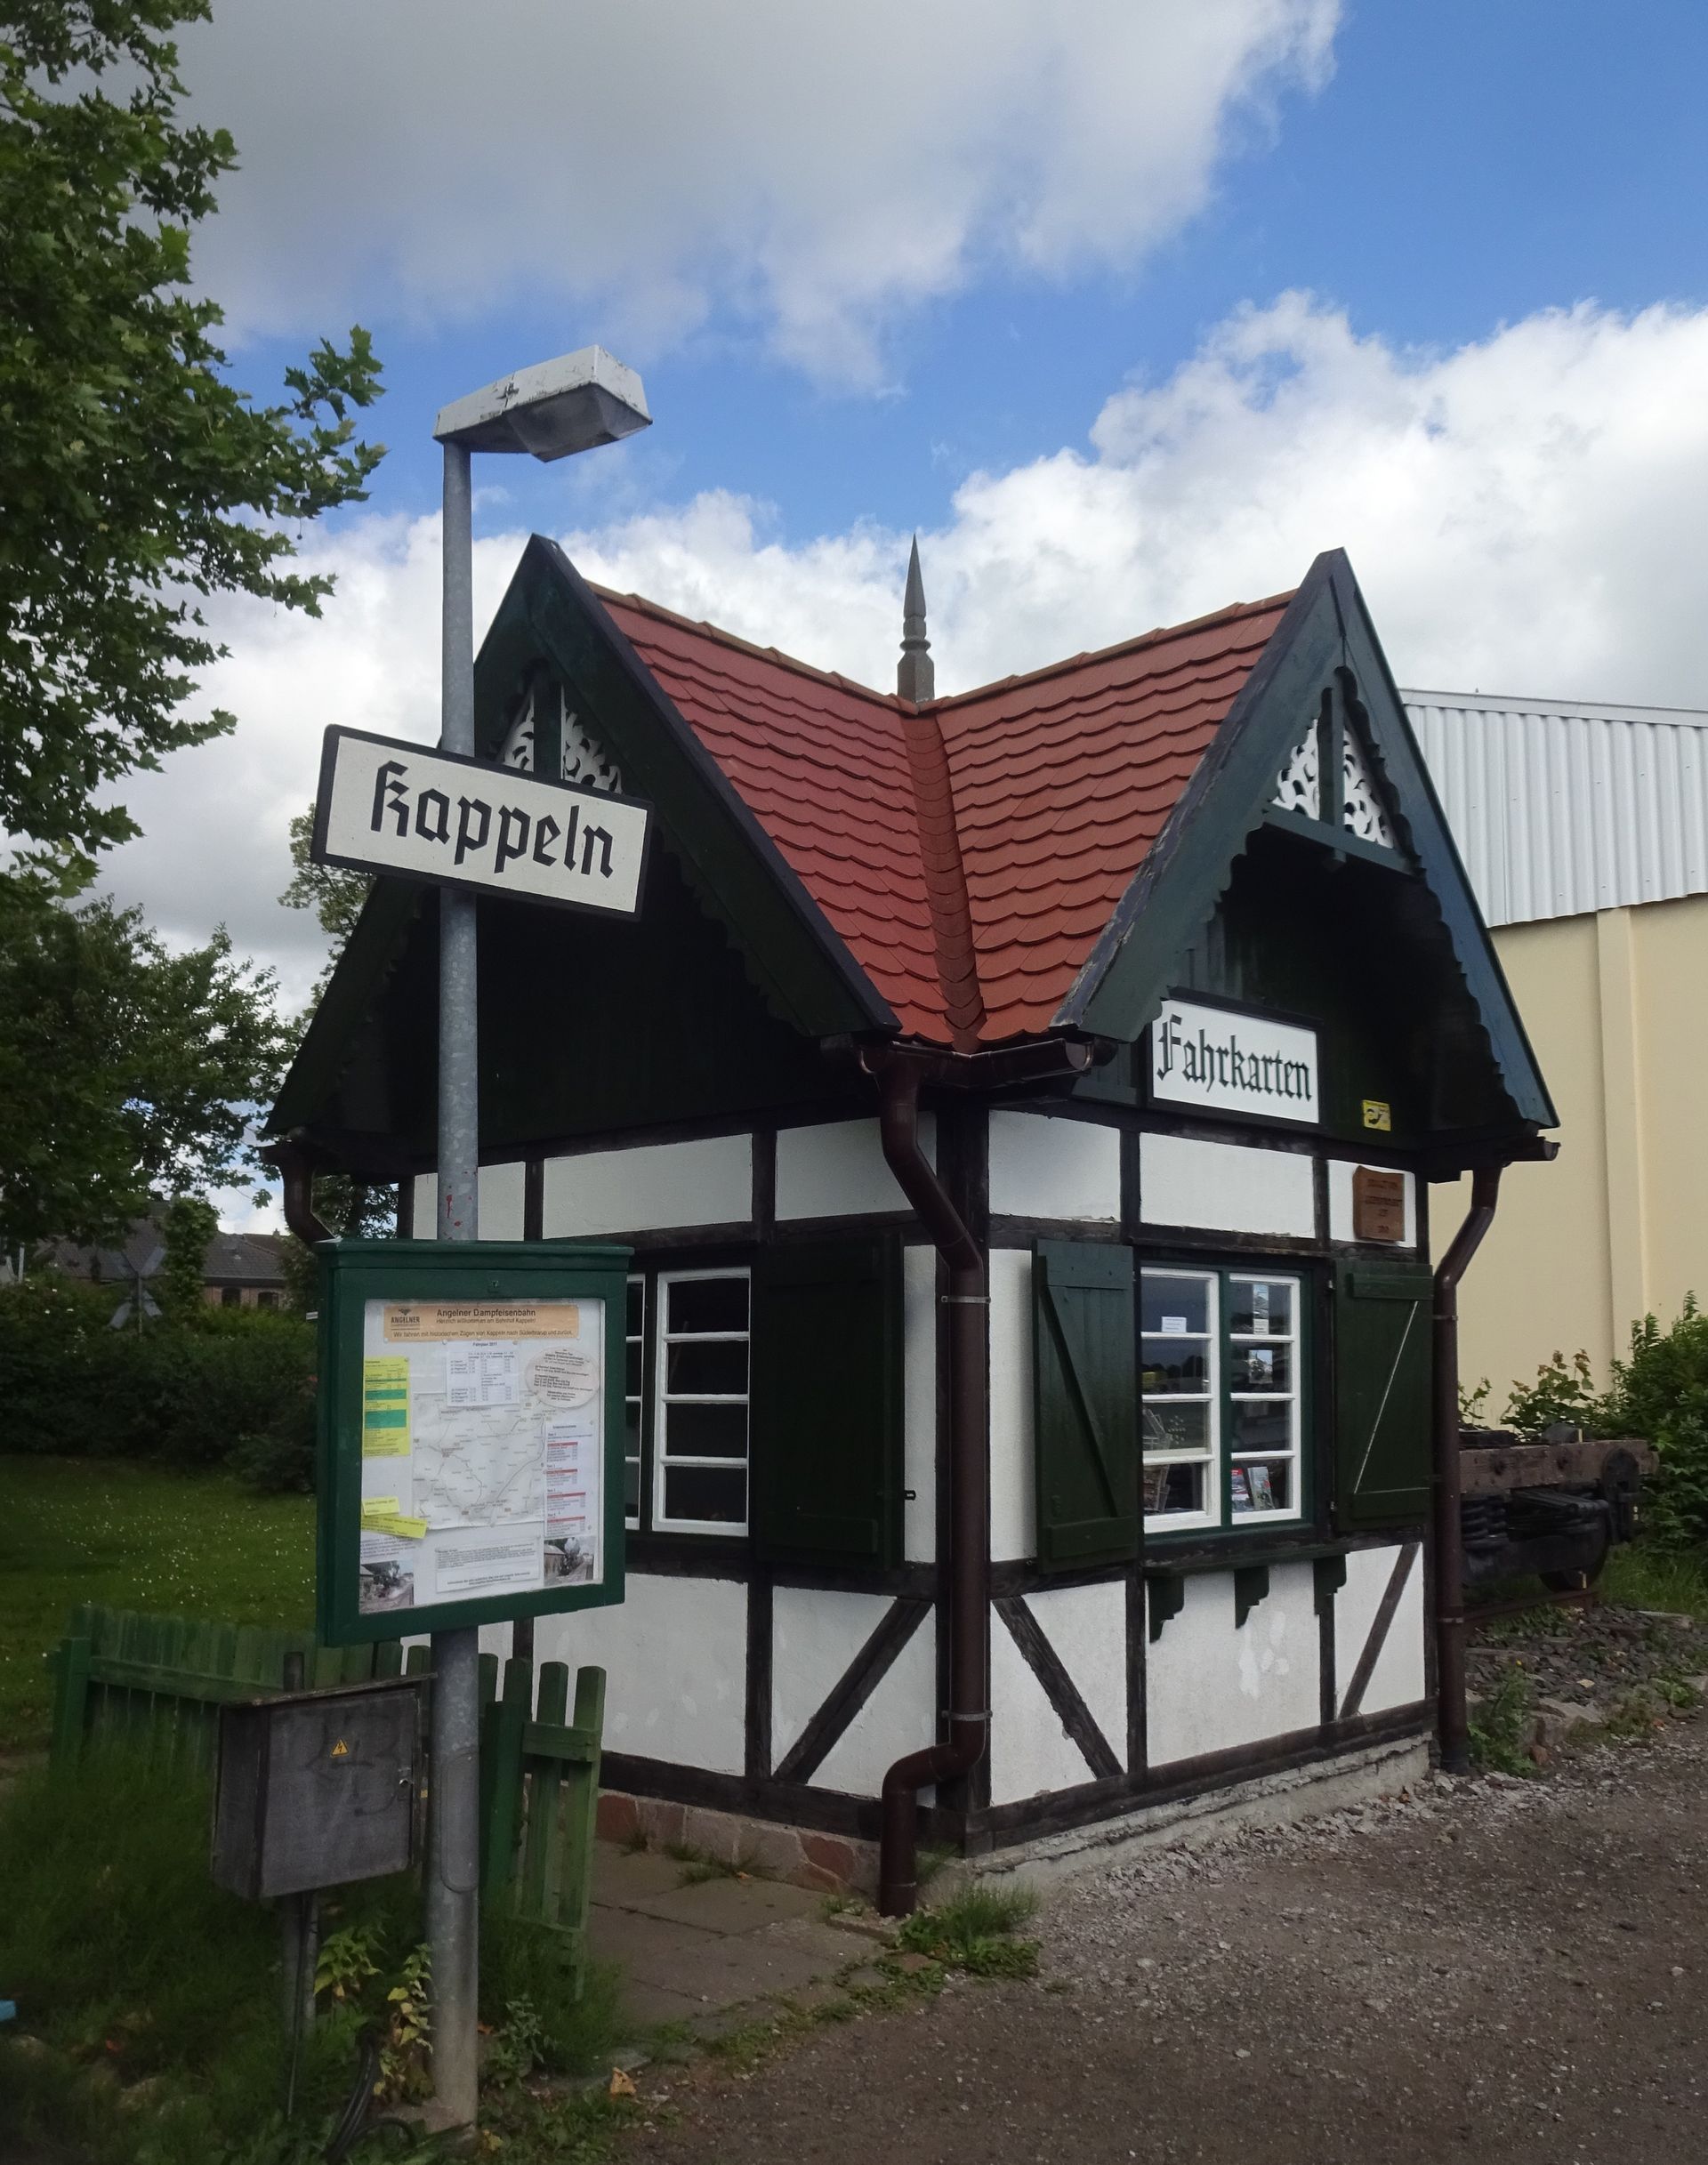 ticket counter in Kappeln